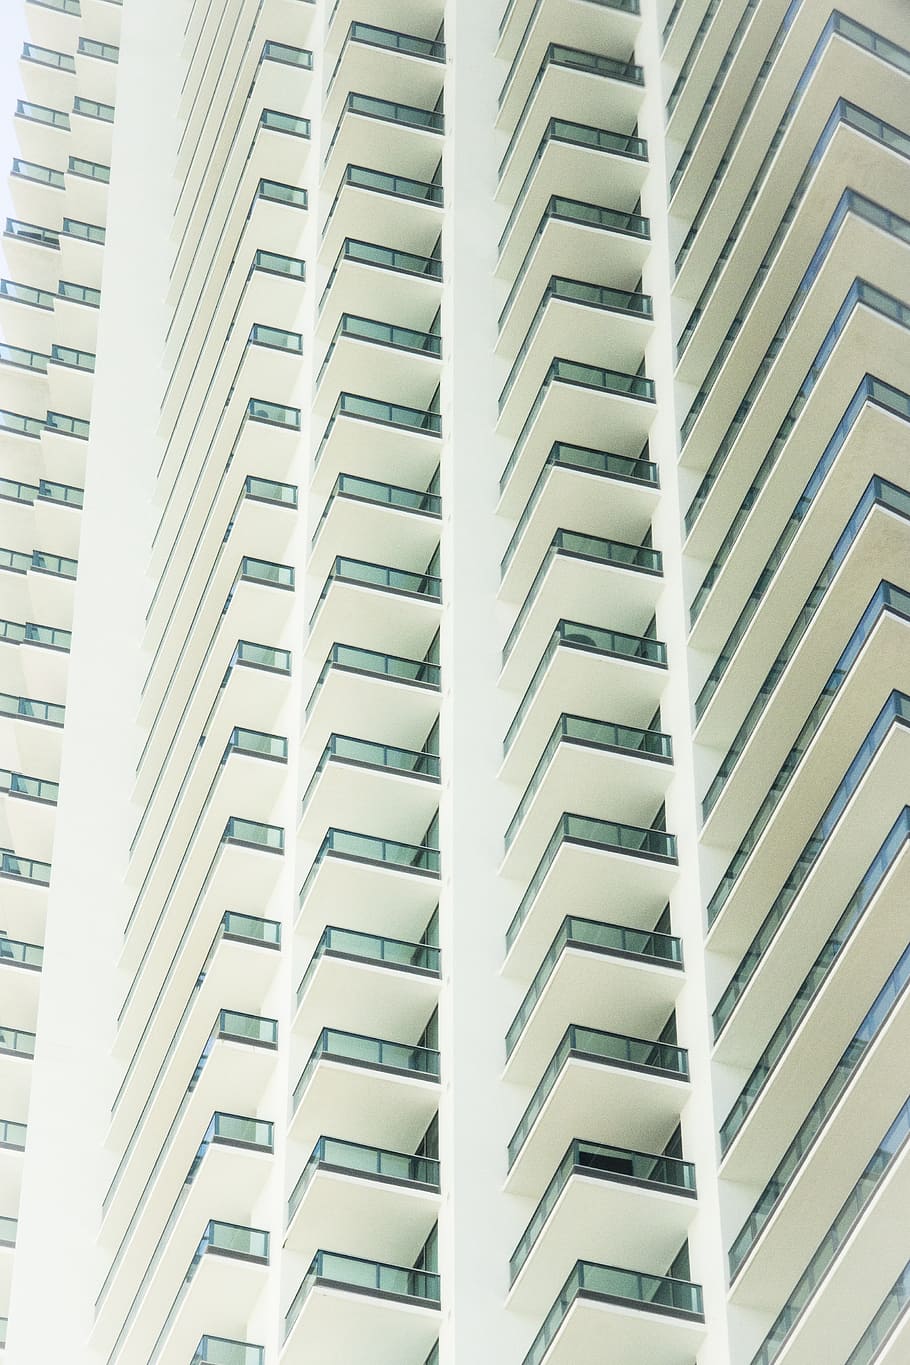 bottom-view of a high rise building, architecture, miami, windows